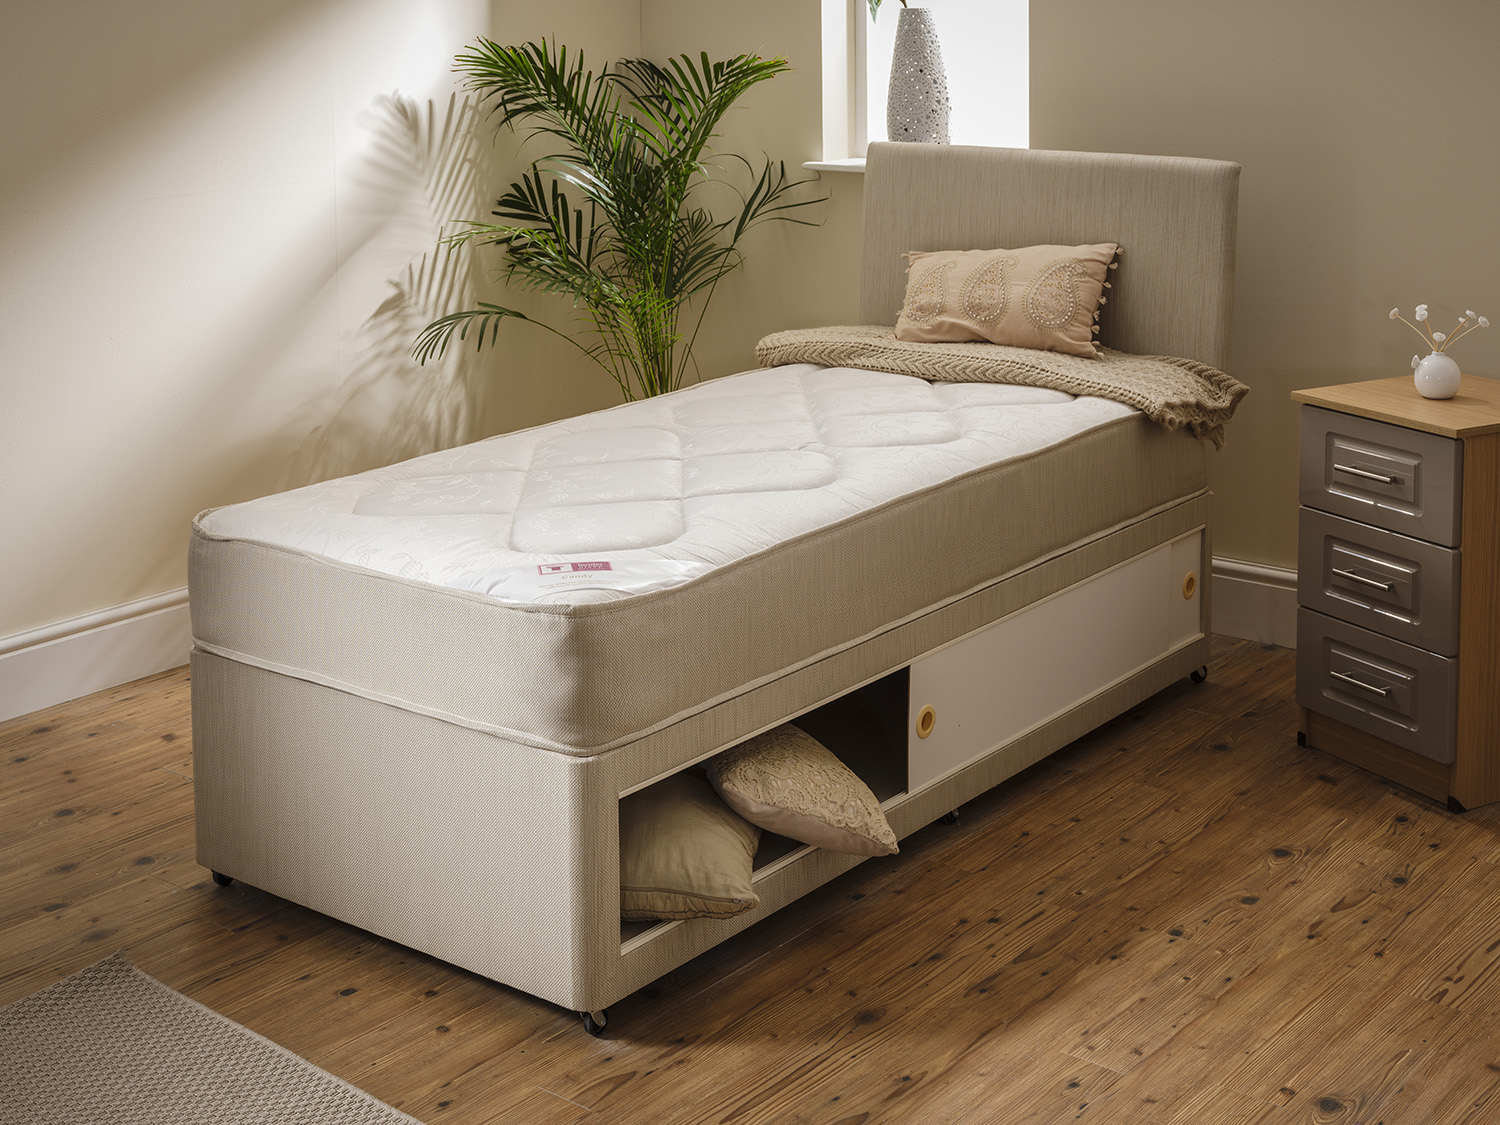 Shops that sell beds uk